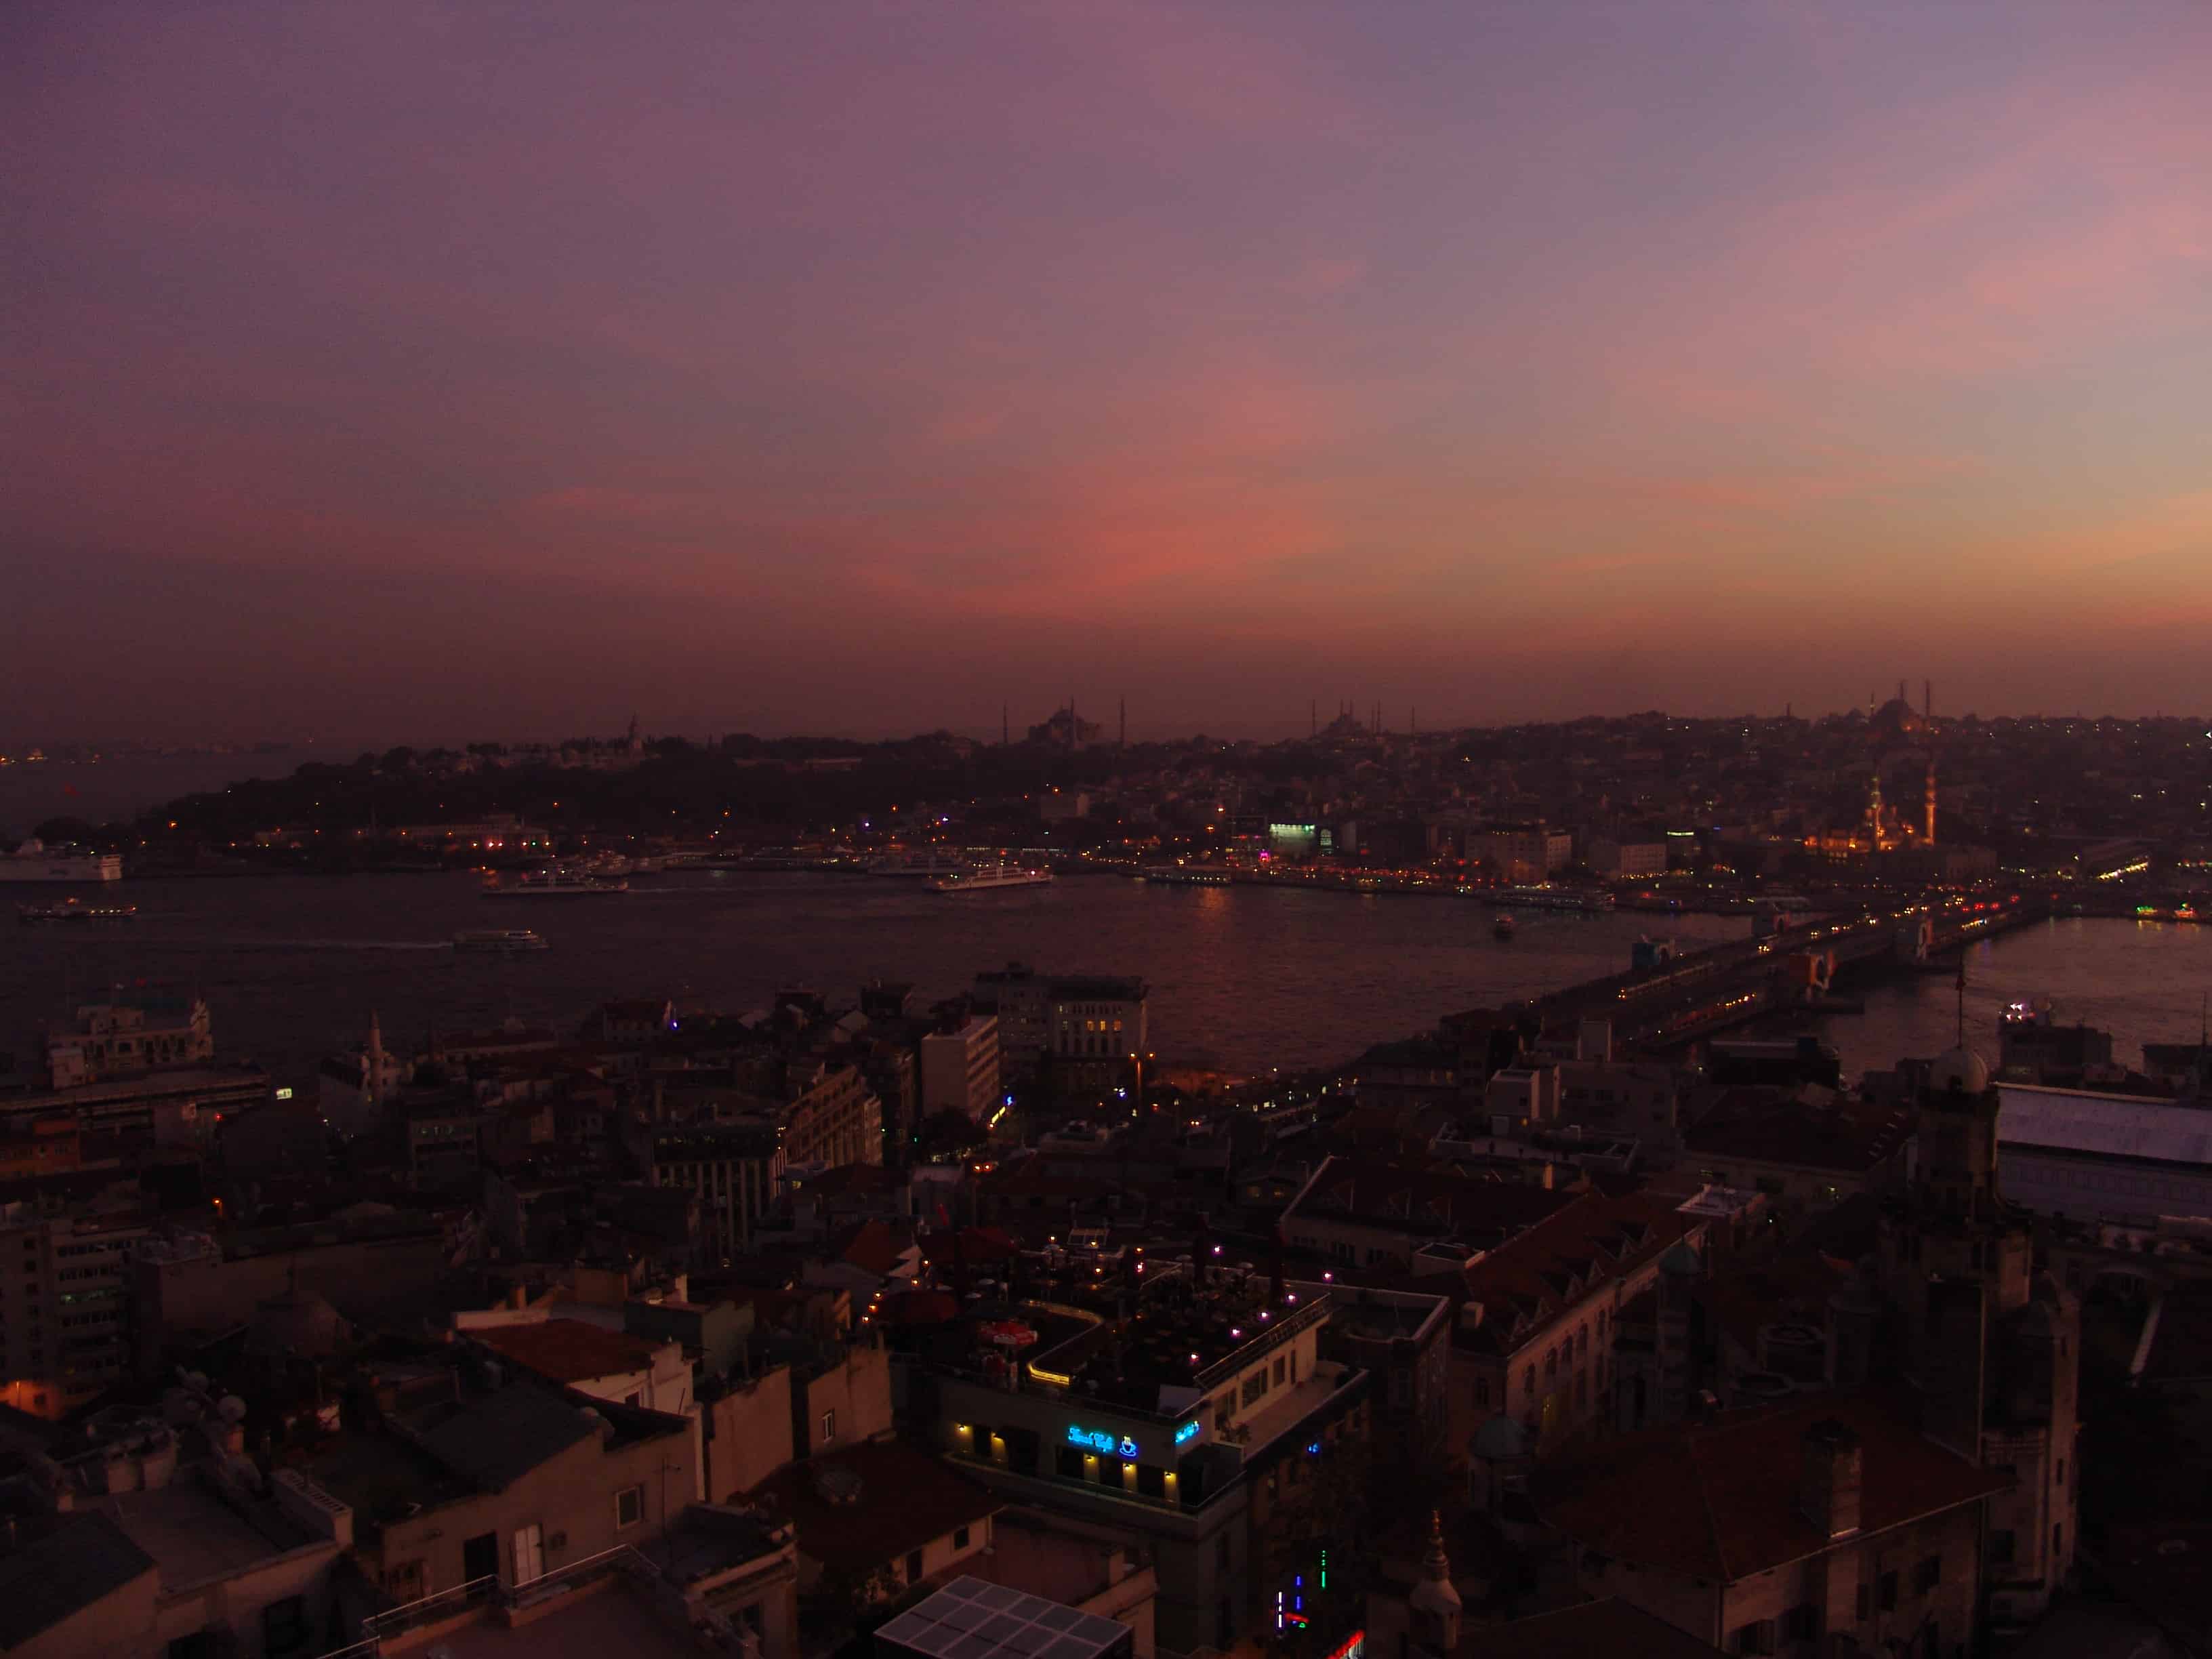 Looking towards the old city at sunset from the top of the Galata Tower in Beyoğlu, Istanbul, Turkey